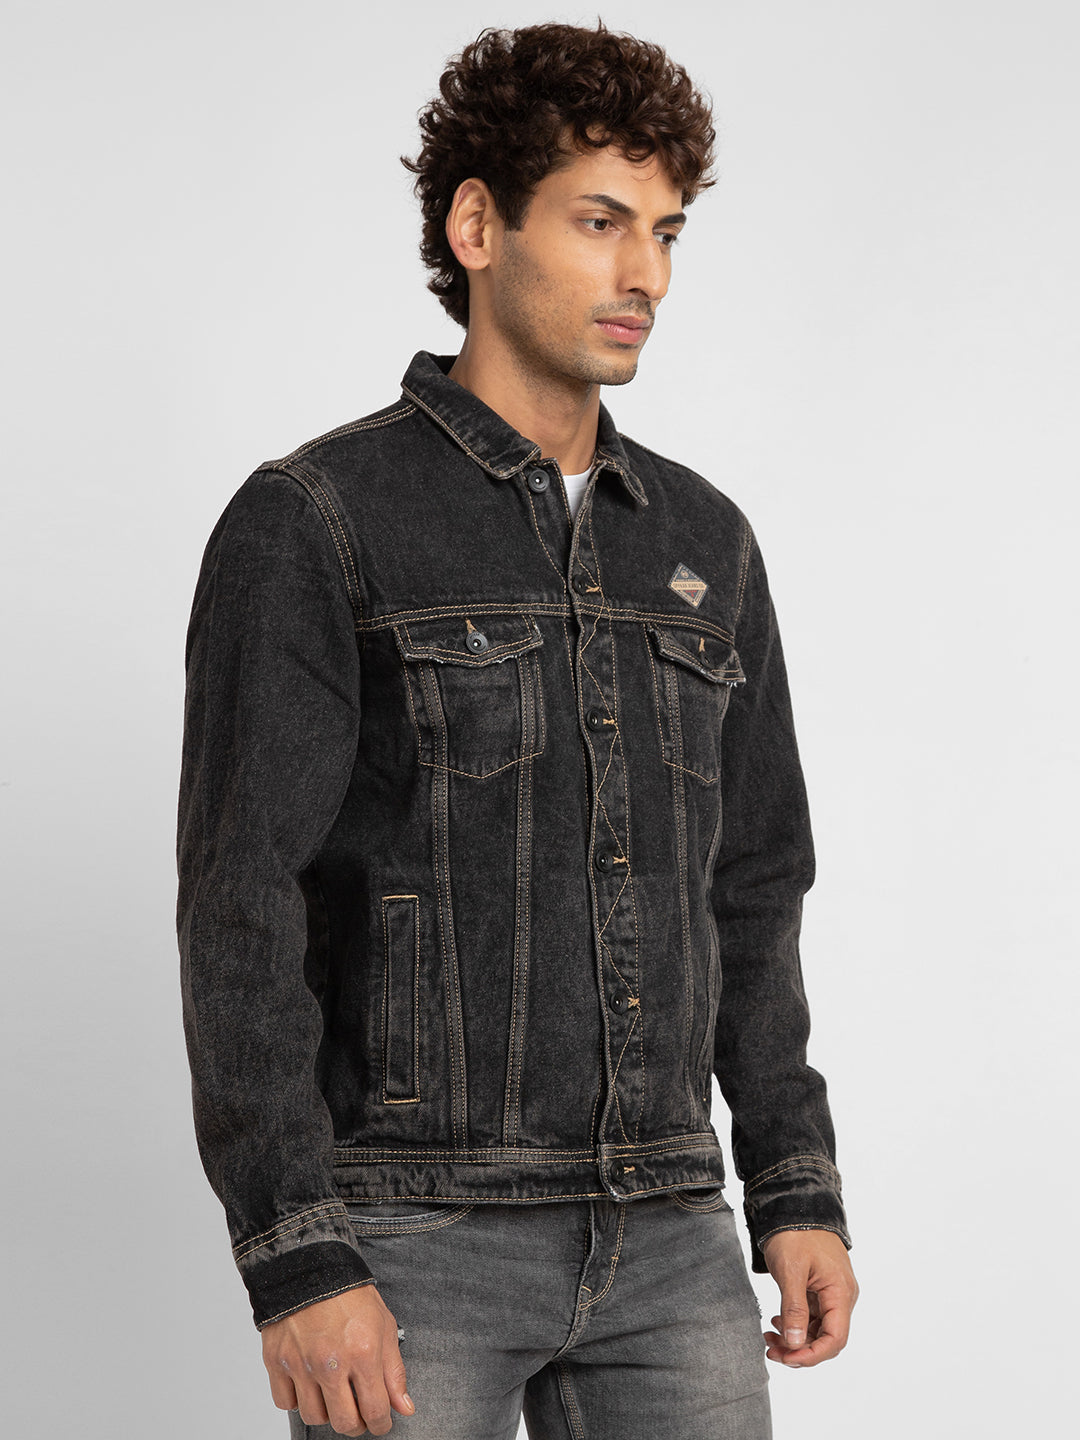 Buy Aeropostale Denim Jackets Online At Best Price Offers In India